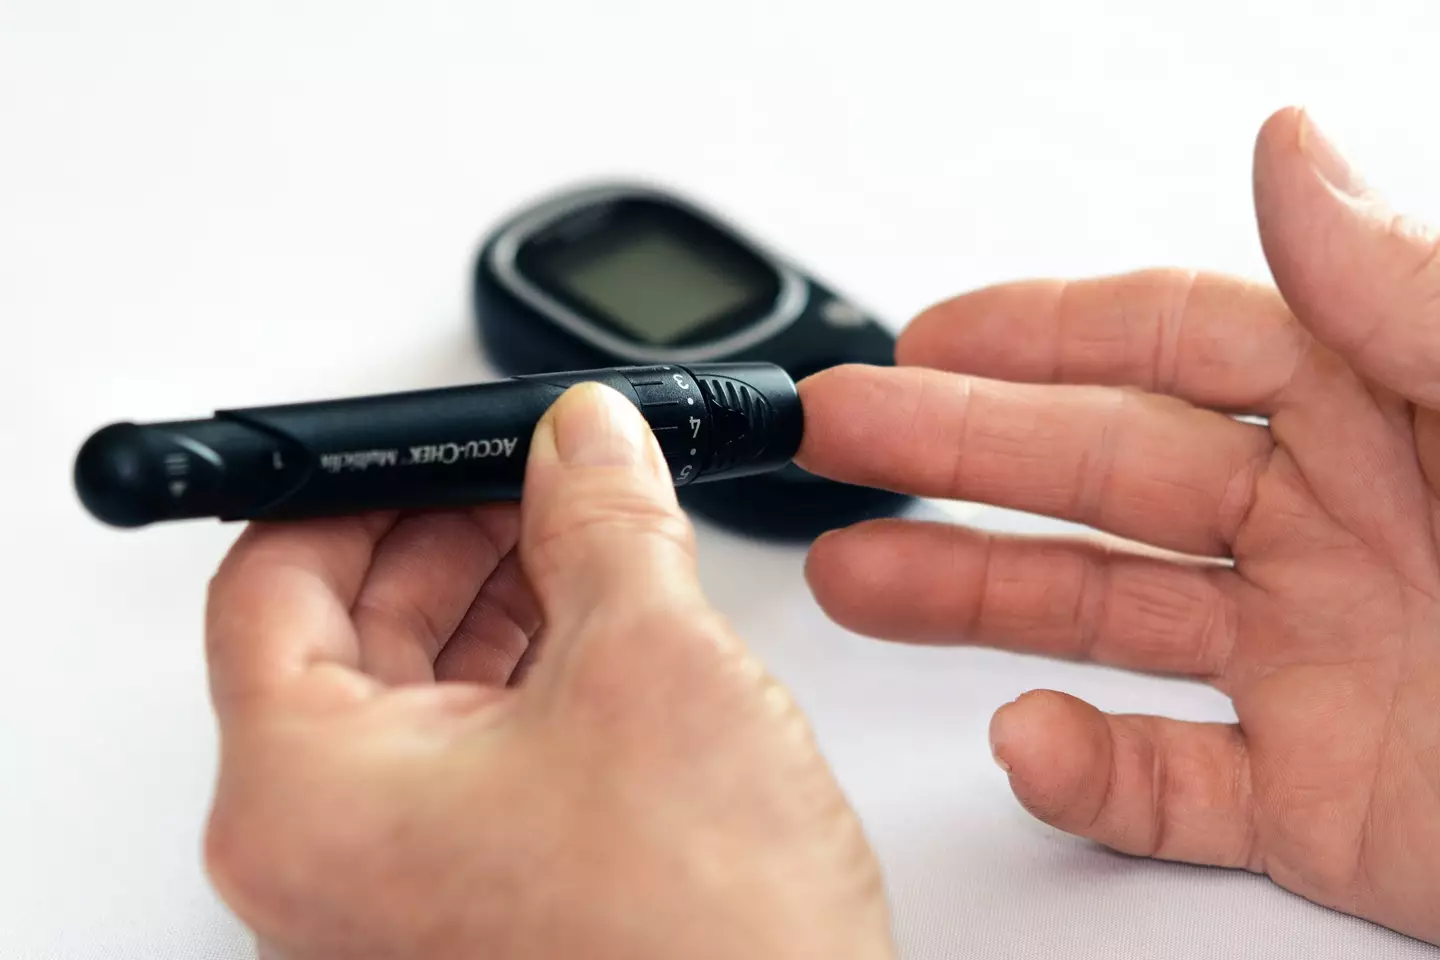 An estimated 500,000 people in the UK could be suffering with diabetes.